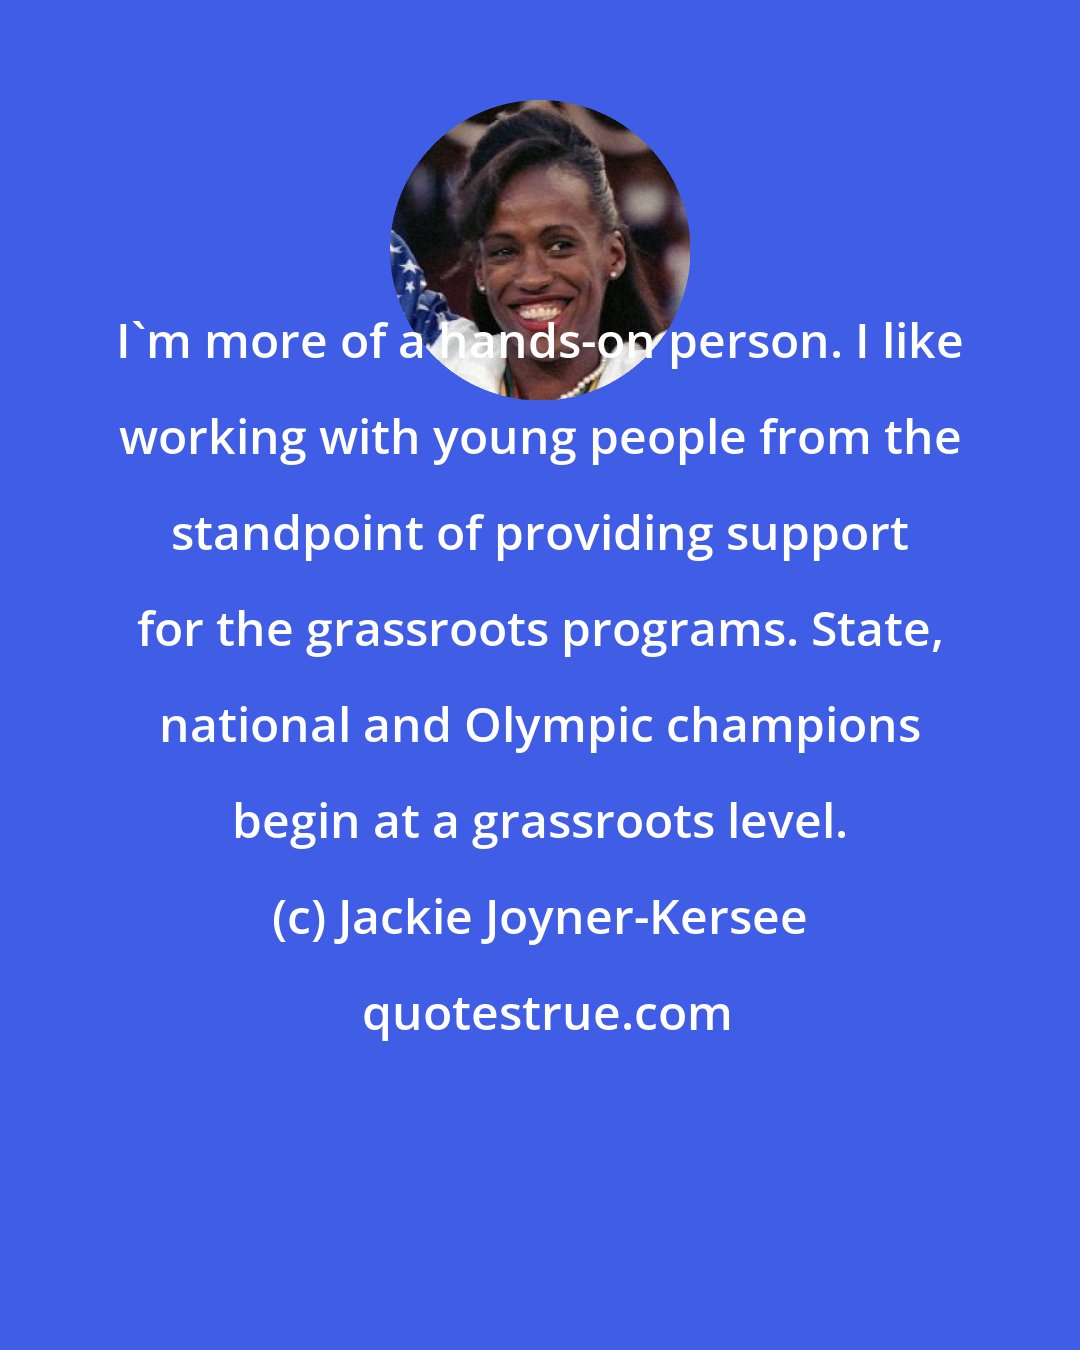 Jackie Joyner-Kersee: I'm more of a hands-on person. I like working with young people from the standpoint of providing support for the grassroots programs. State, national and Olympic champions begin at a grassroots level.